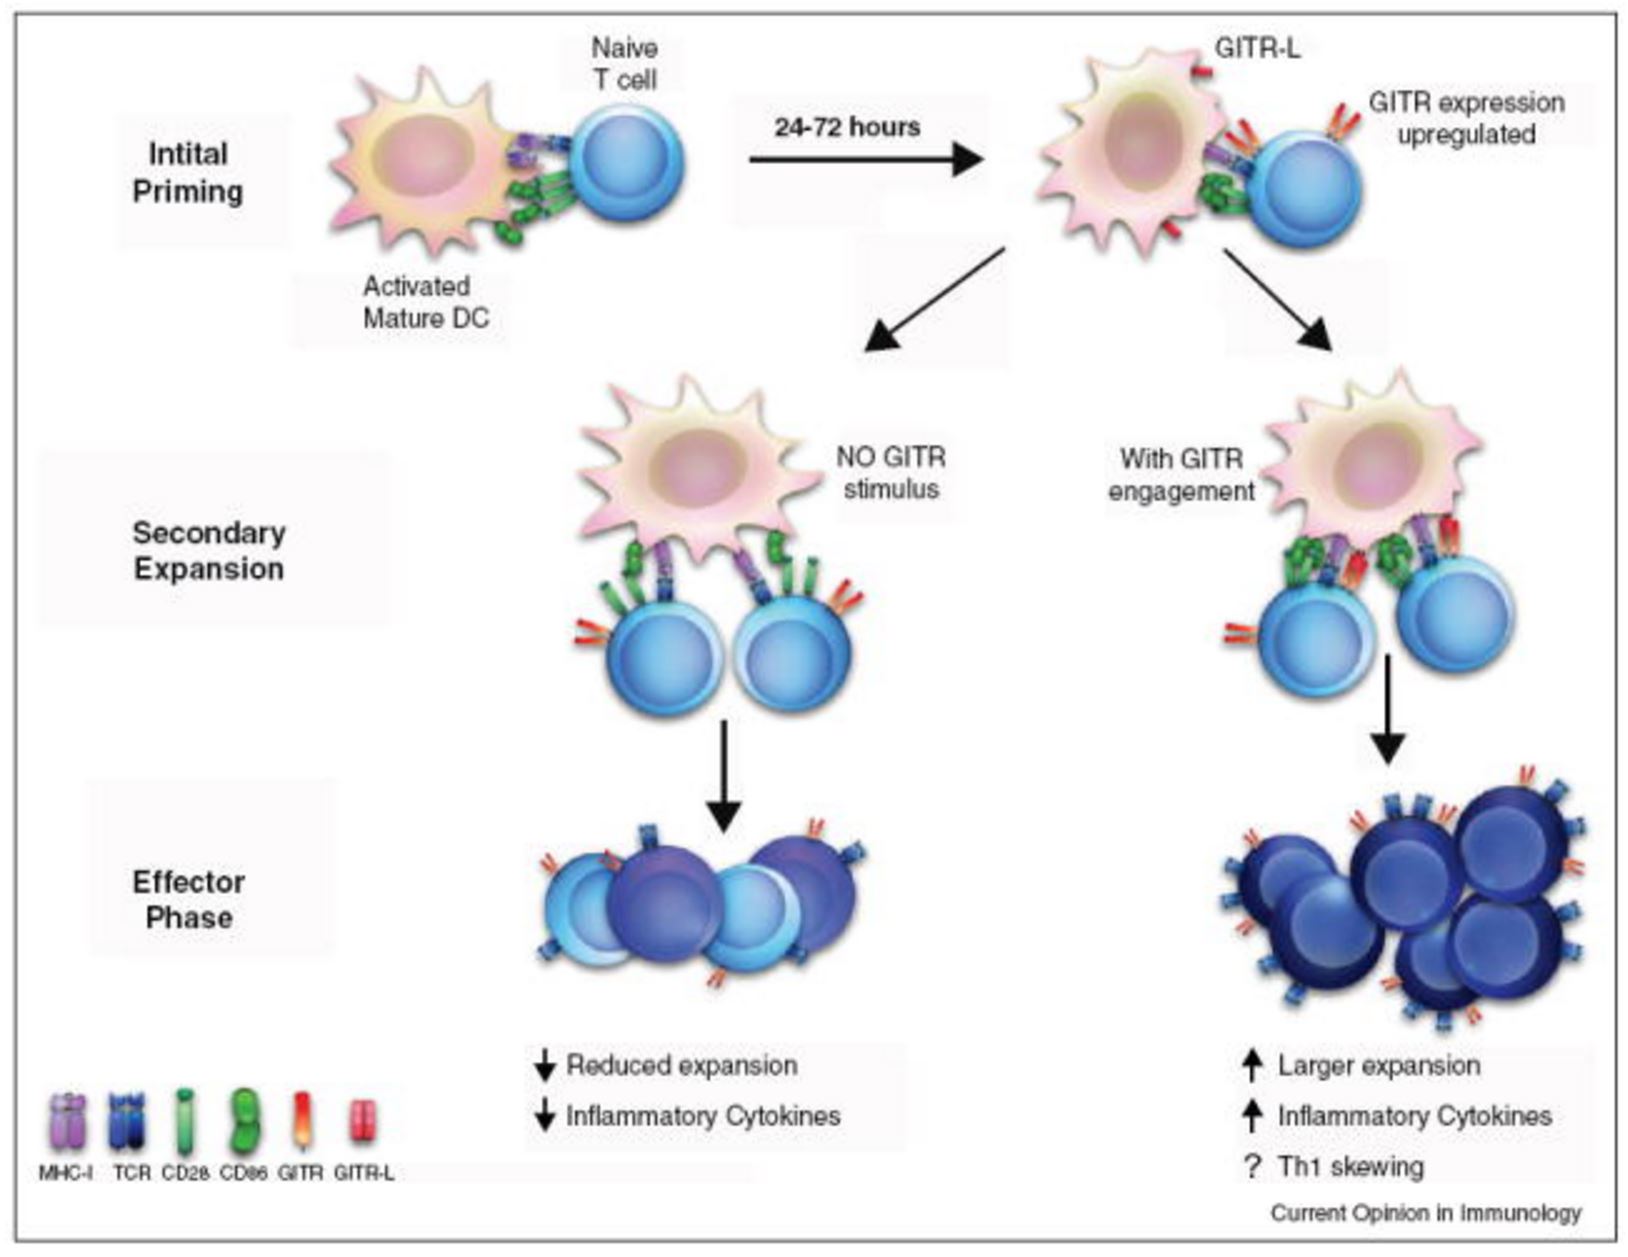 Model of GITR function during an immune response. During the initial phase of priming, naïve T cells are activated by interactions between the TCR and MHC molecules, receiving co-stimulation through CD28 binding to either CD80 or CD86. After passing this checkpoint, activated T cells enter secondary rounds of priming and expansion, upregulating GITR 24–72 h after this initial activation. If GITR-L is expressed by DCs, it alters both the quality and the quantity of the ensuing immune response. The net result of which is enhanced inflammatory response, with increased persistence of the antigen-specific T cells. http://www.ncbi.nlm.nih.gov/pmc/articles/PMC3413251/